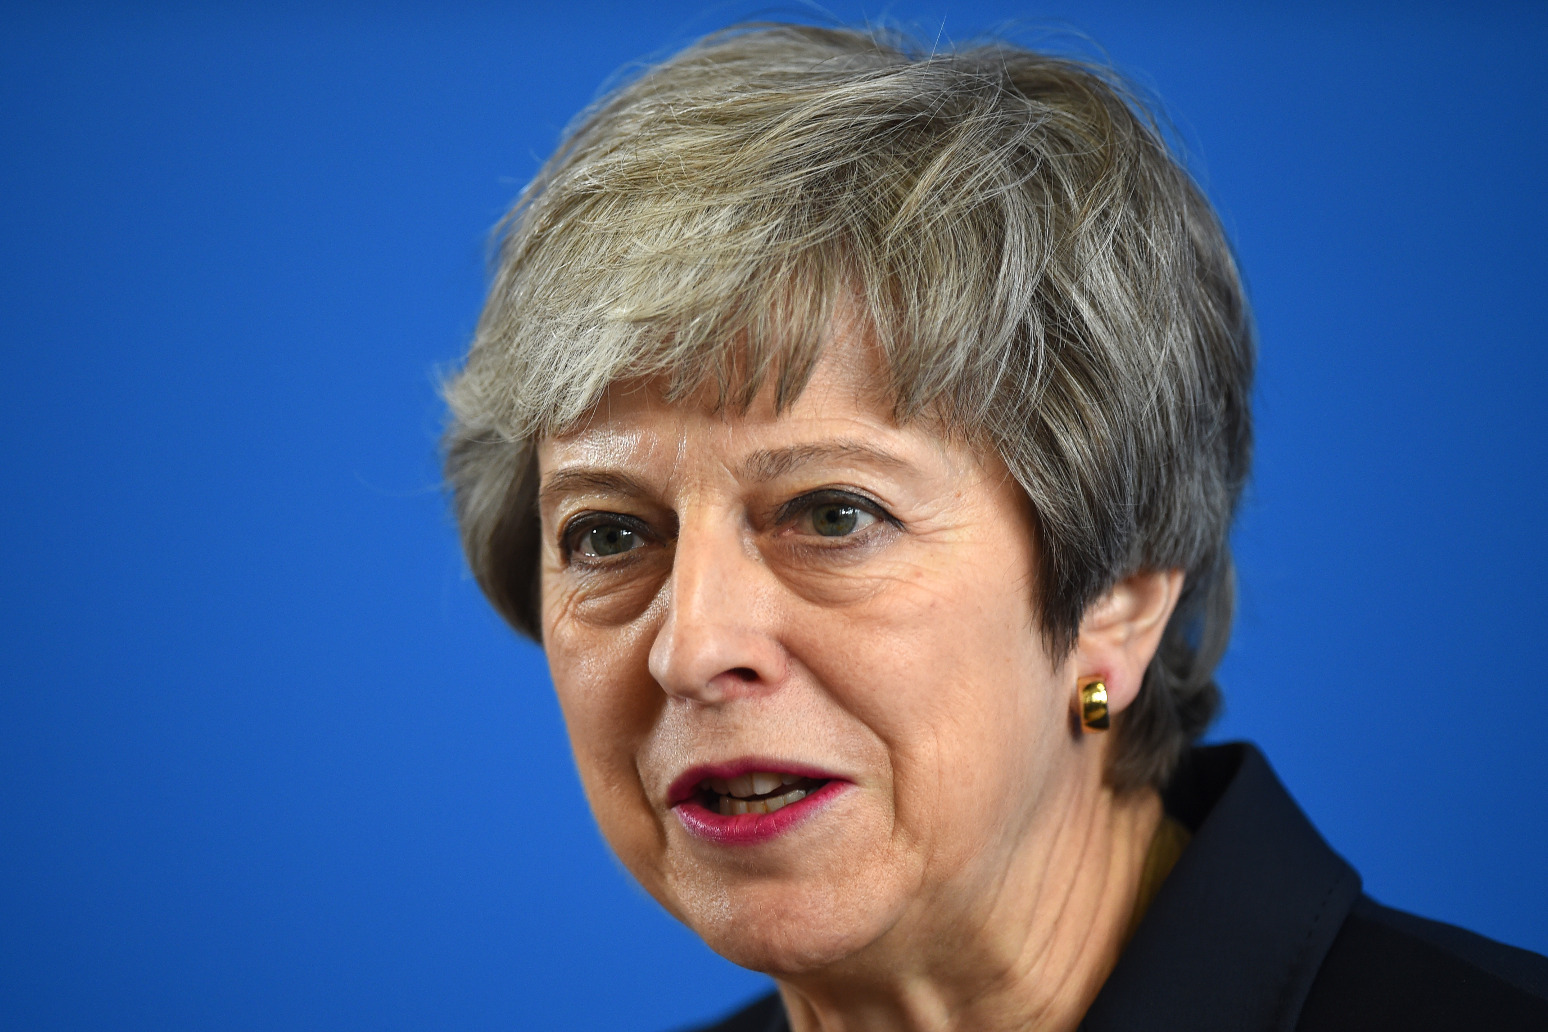 Theresa May questions legality and ethics of plan to send migrants to Rwanda